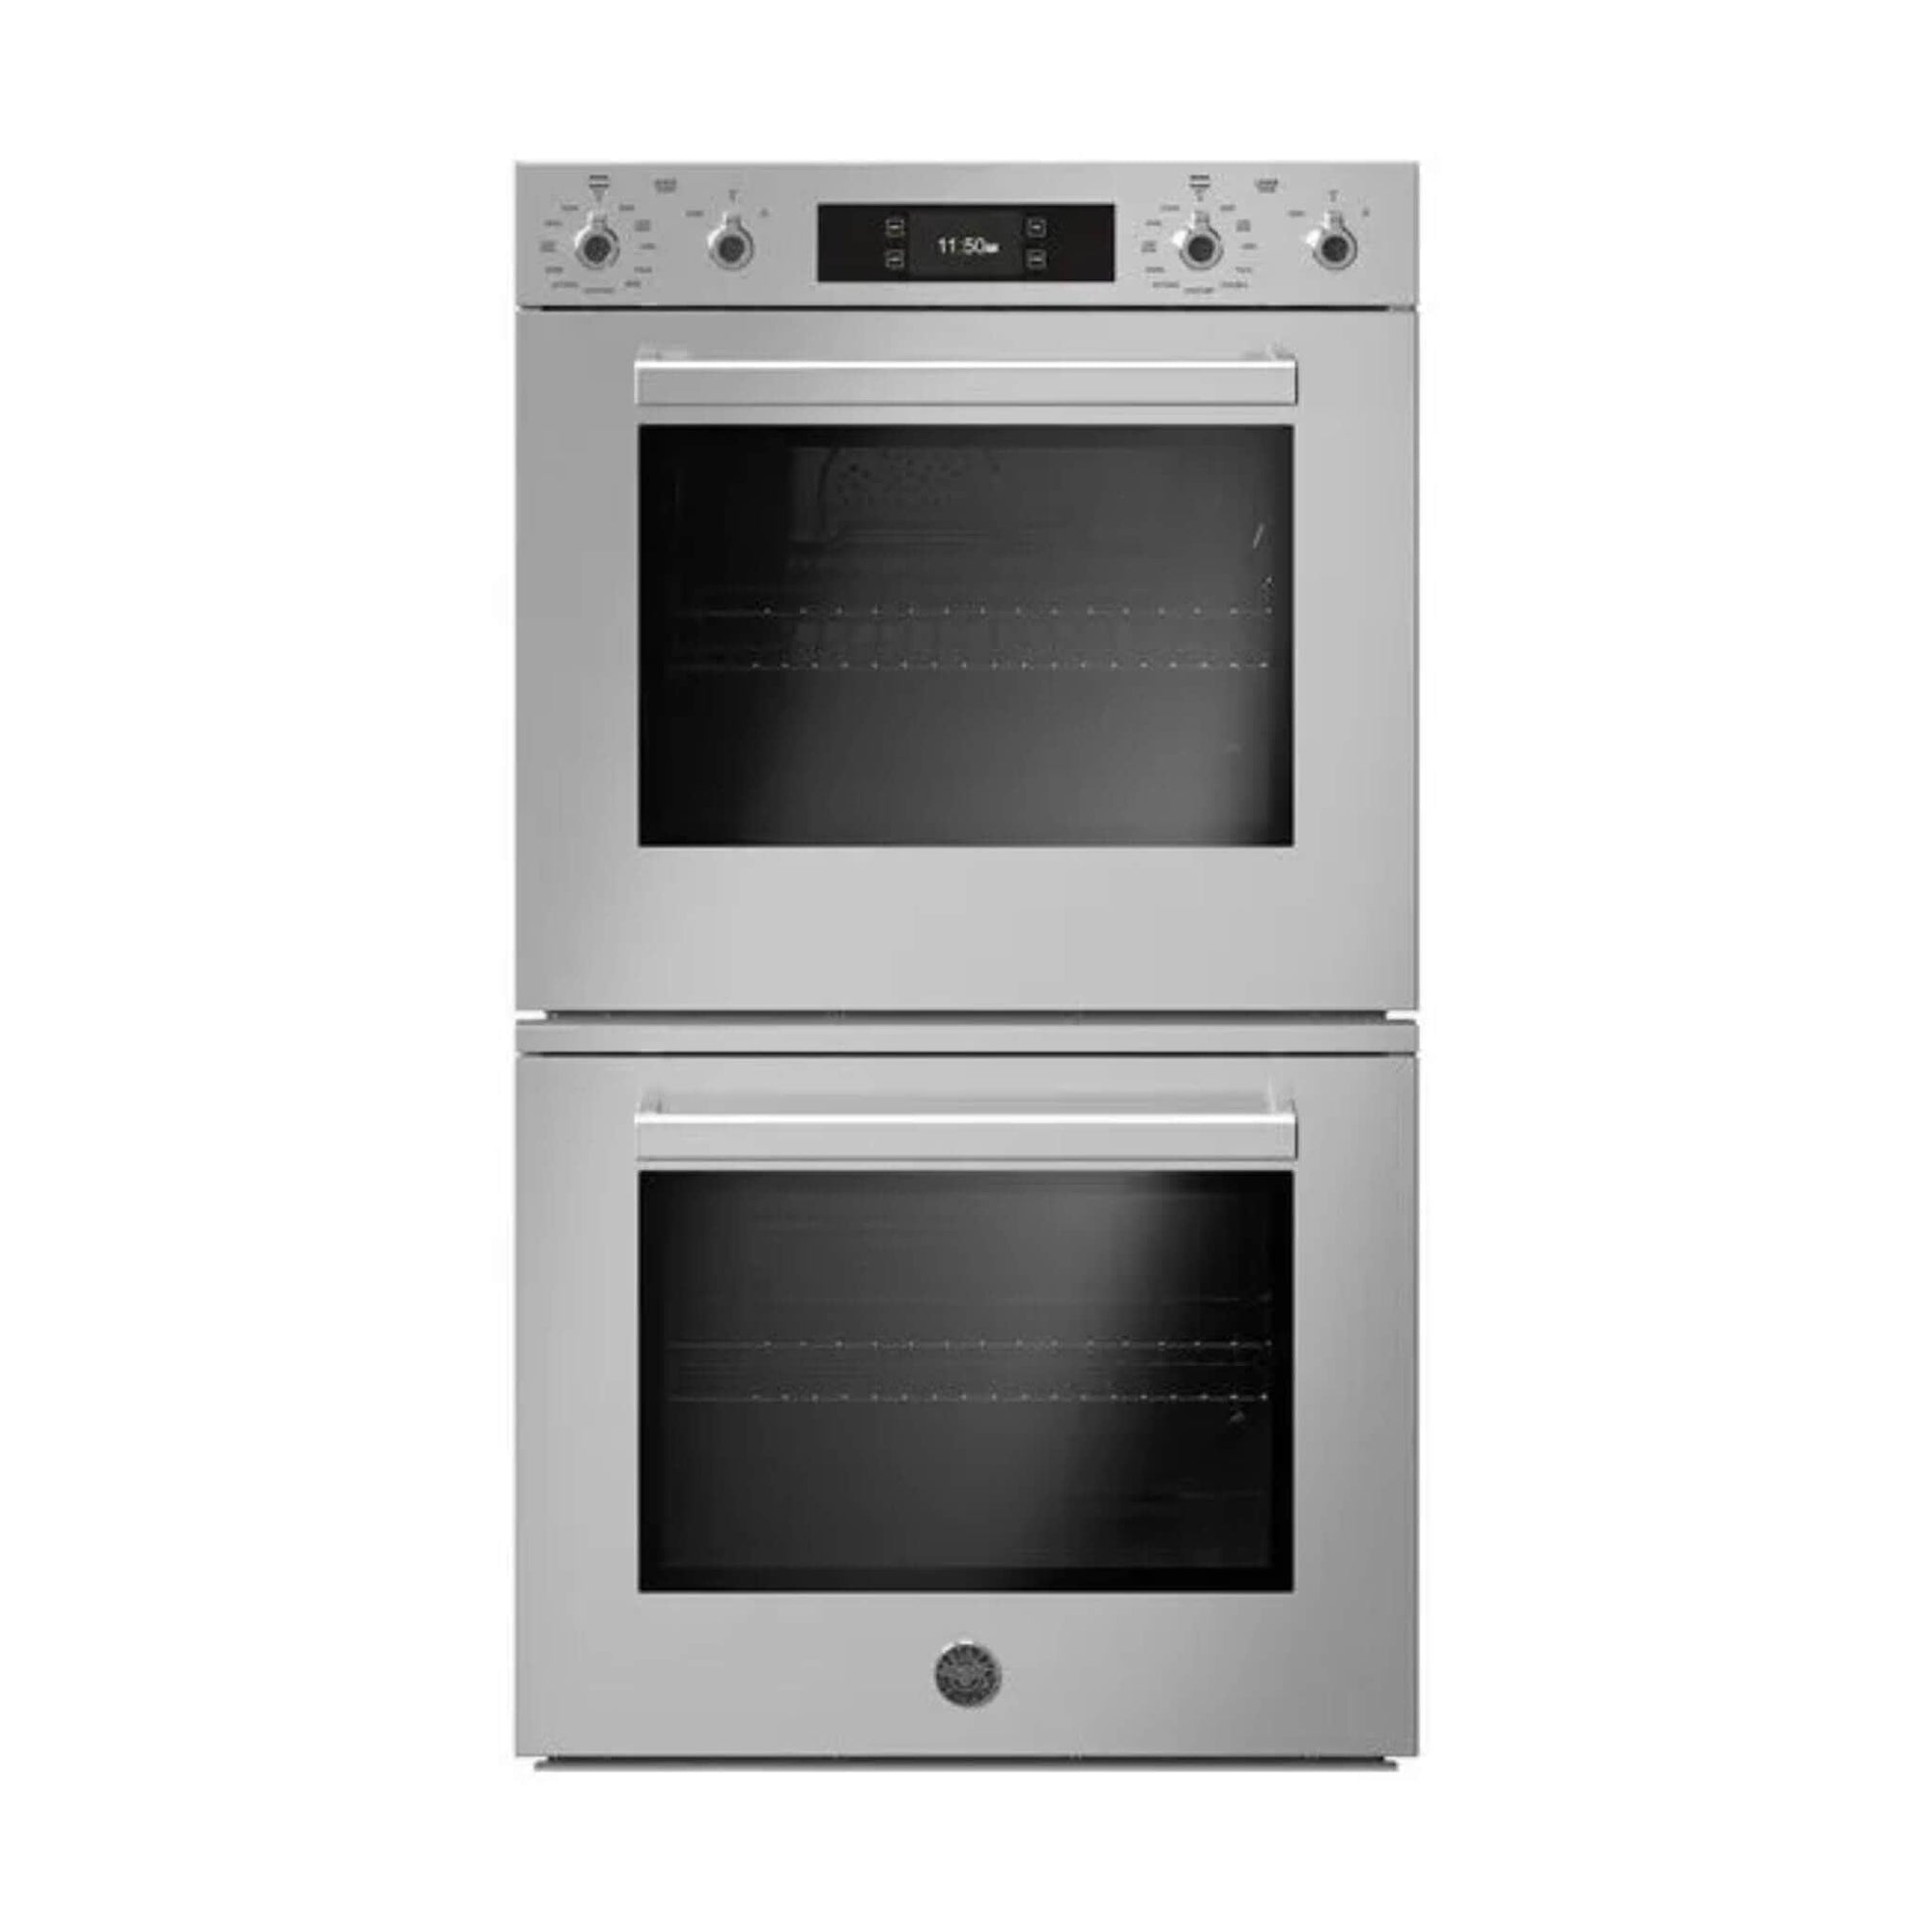 30" Single Convection Oven Top Version (Change Image) - Culinary Hardware